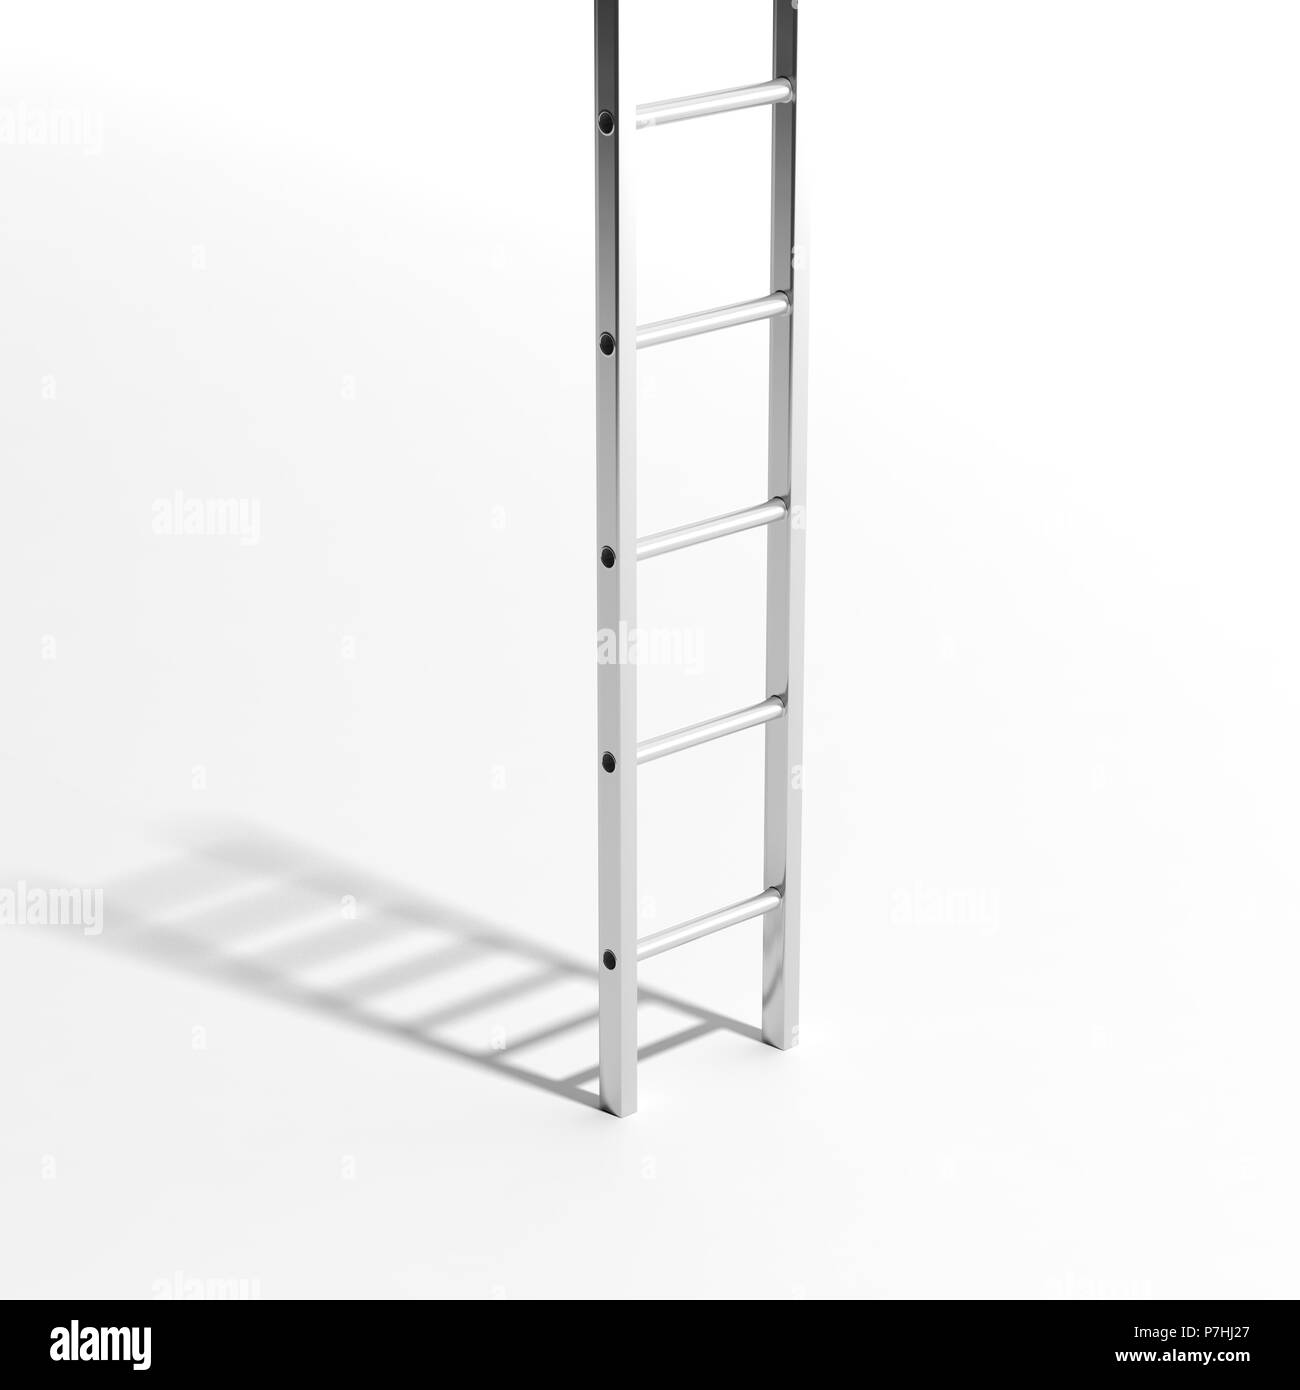 Metal wall ladder isolated on white background. 3d illustration Stock Photo